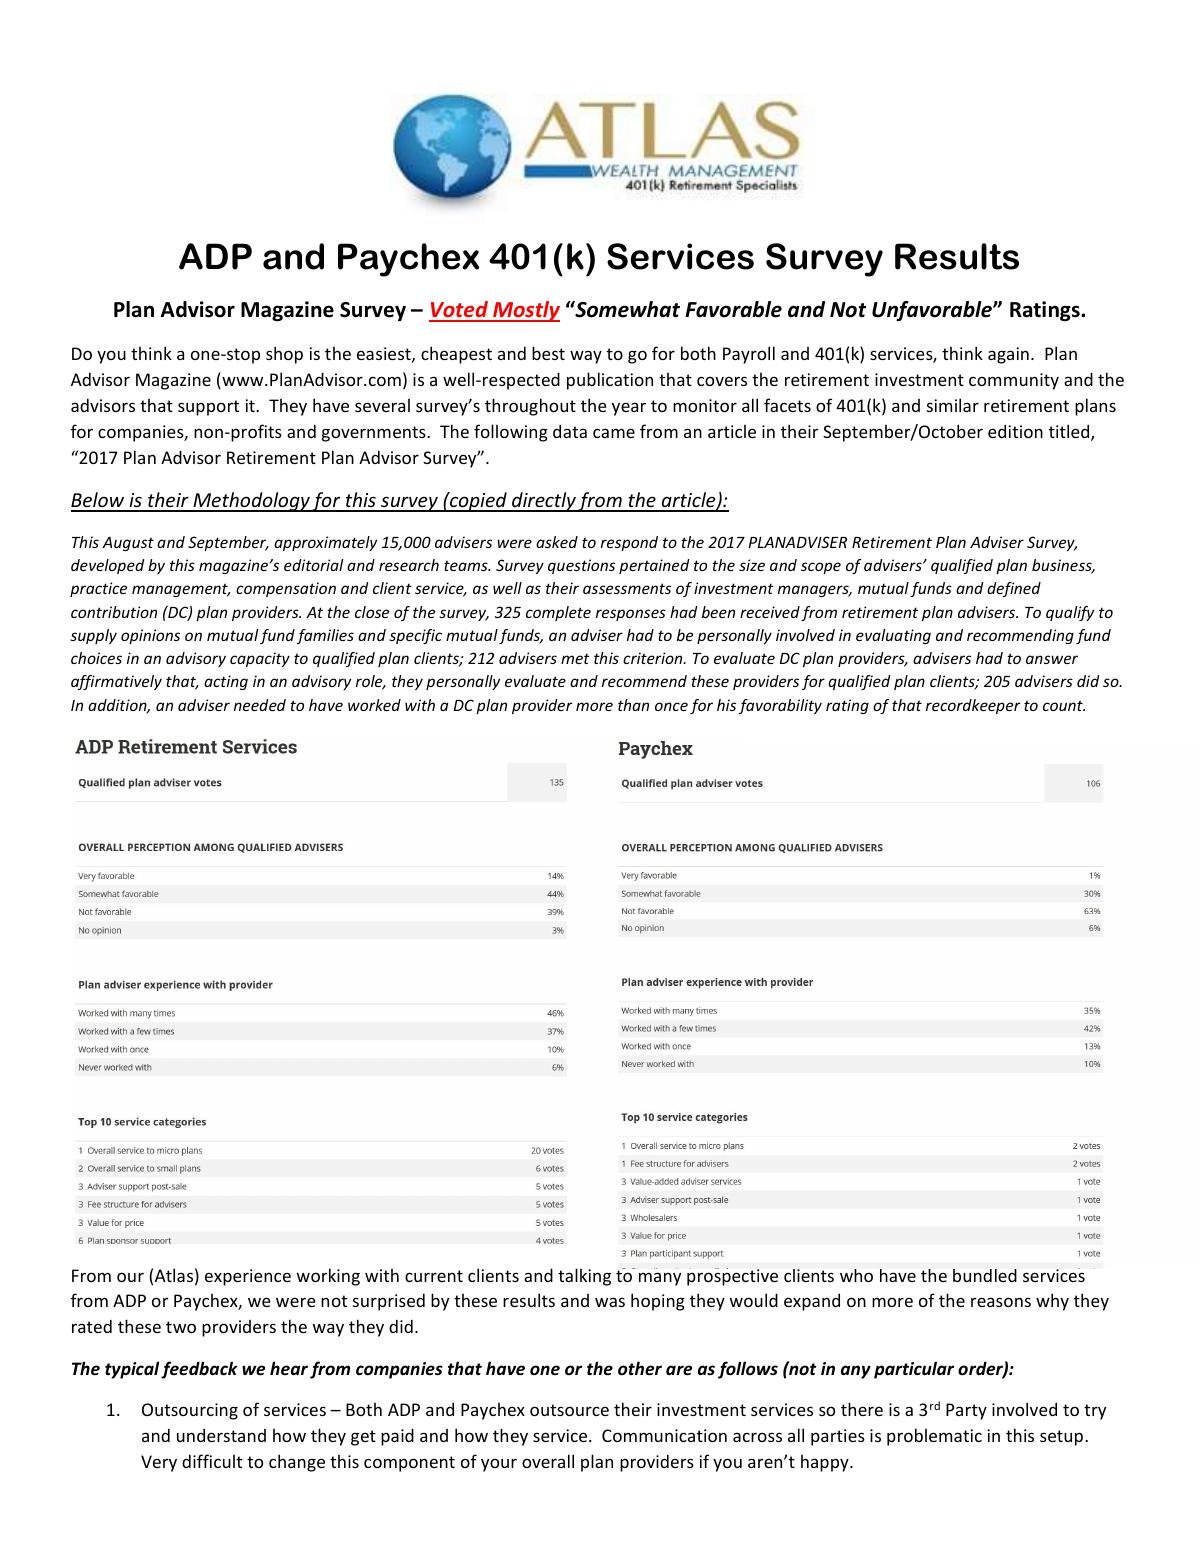 ADP and Paychex Plan Advisor Survey Results